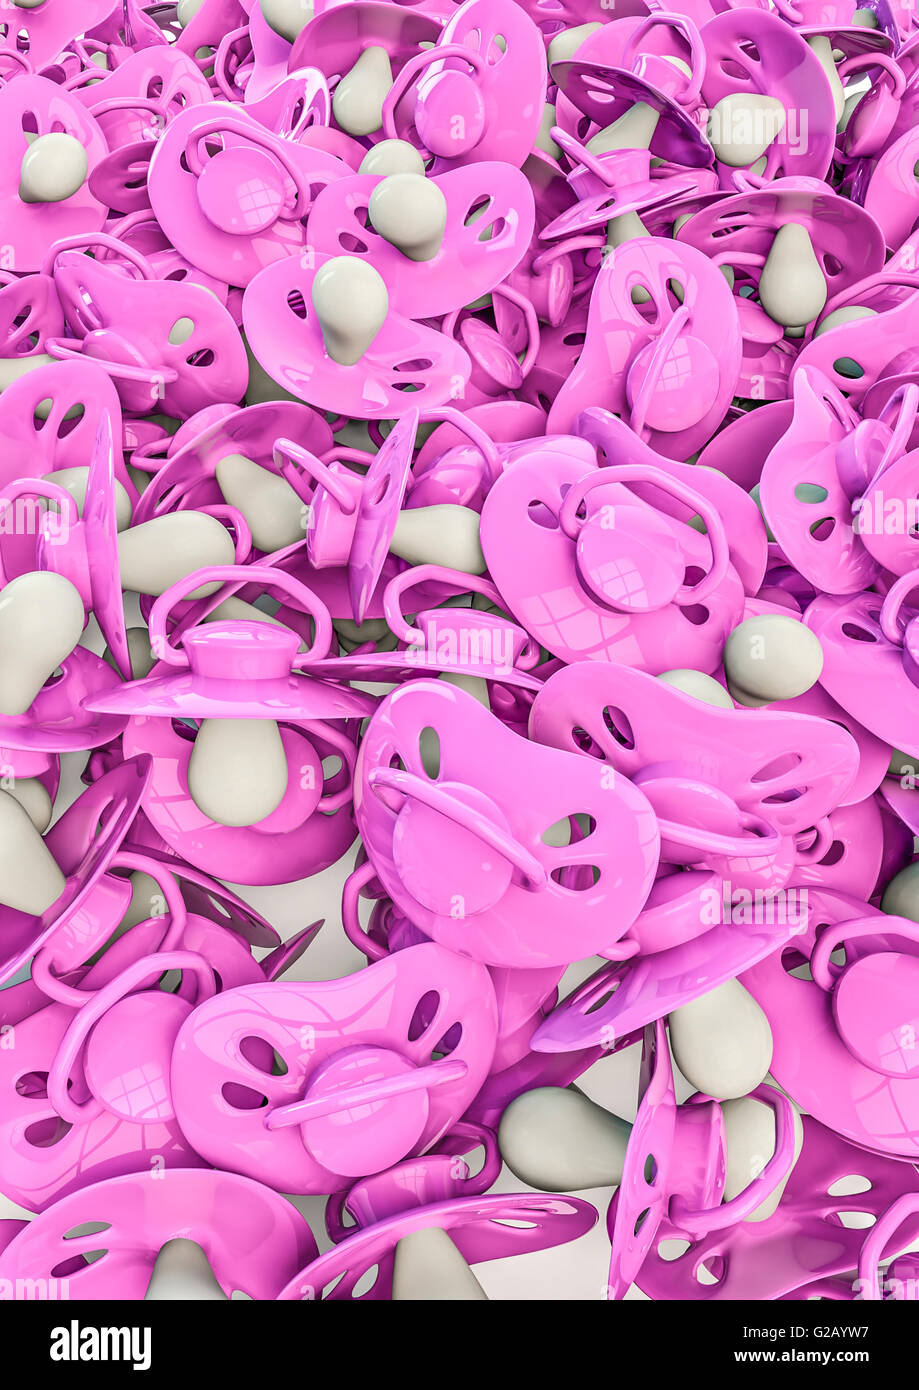 Pacifier girls background / 3D render of baby pacifiers Stock Photo